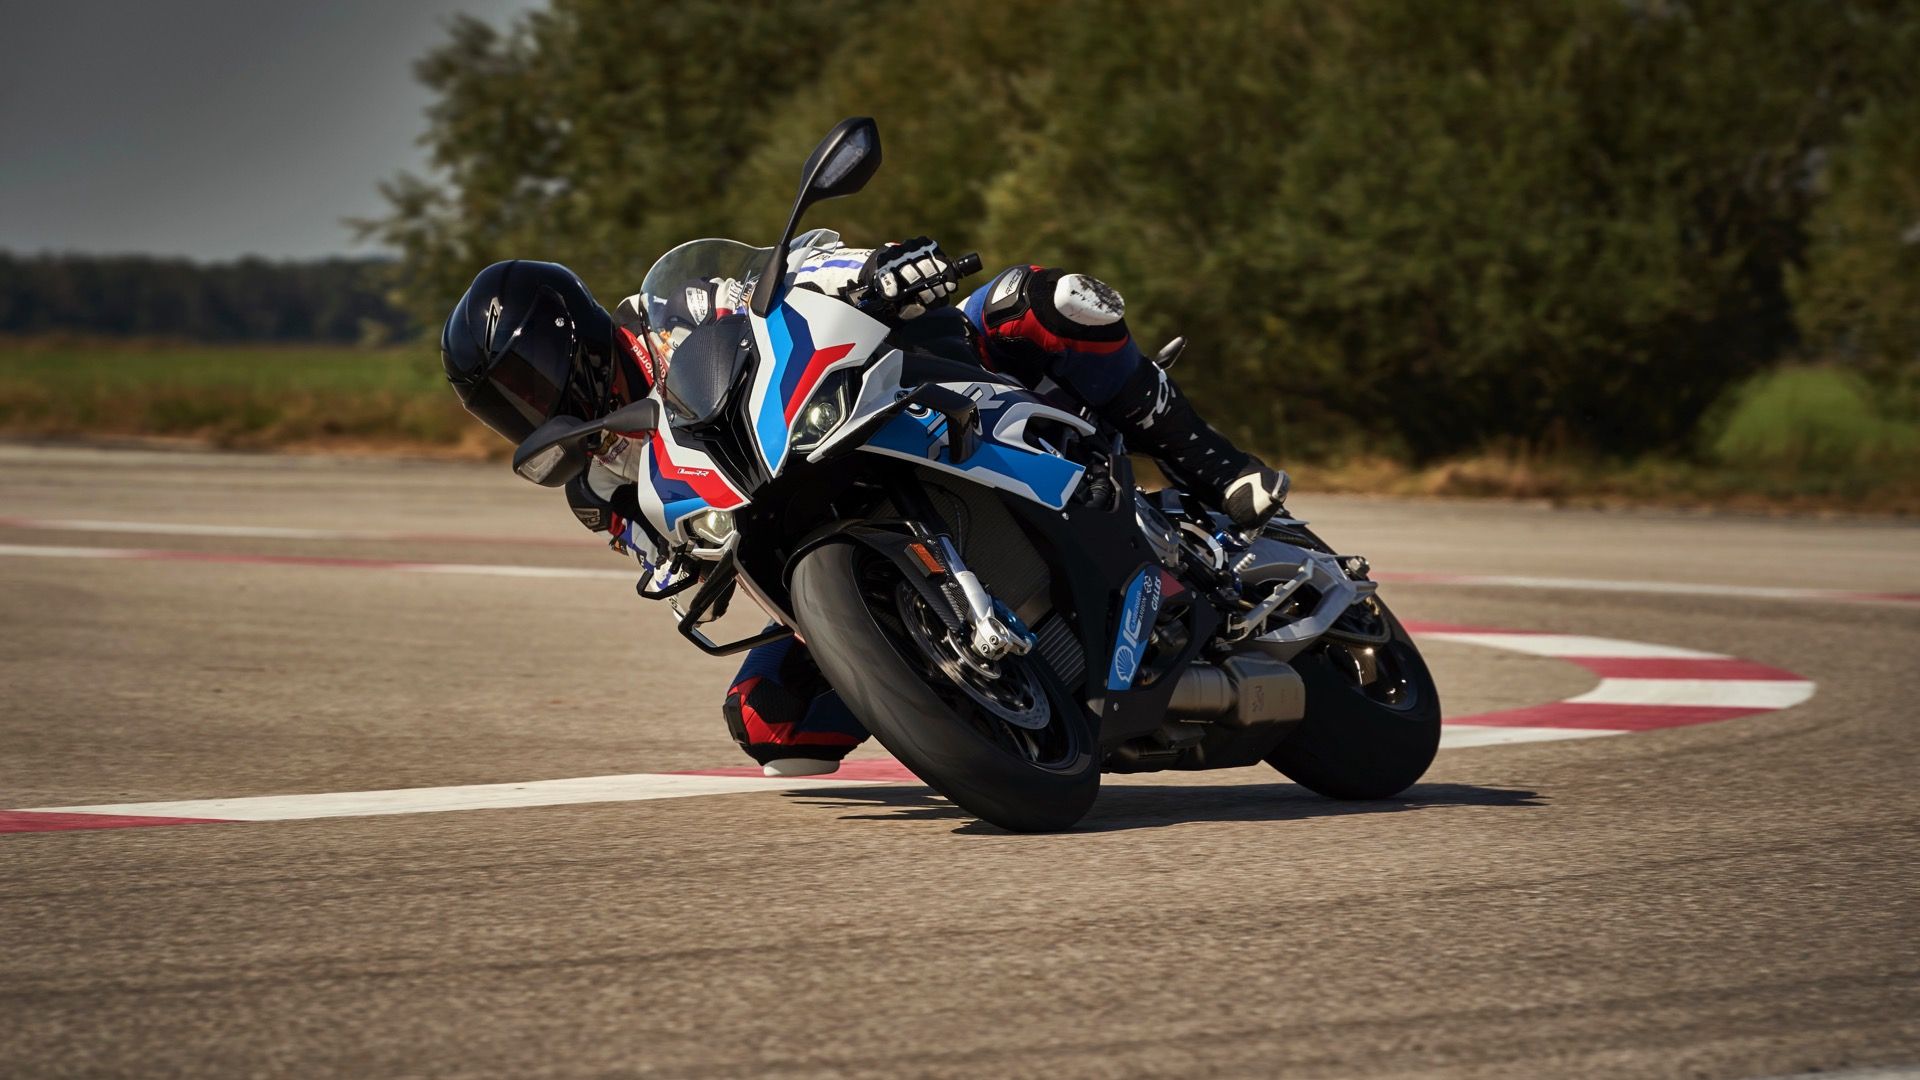 BMW M 1000 RR is the M division's first motorcycle